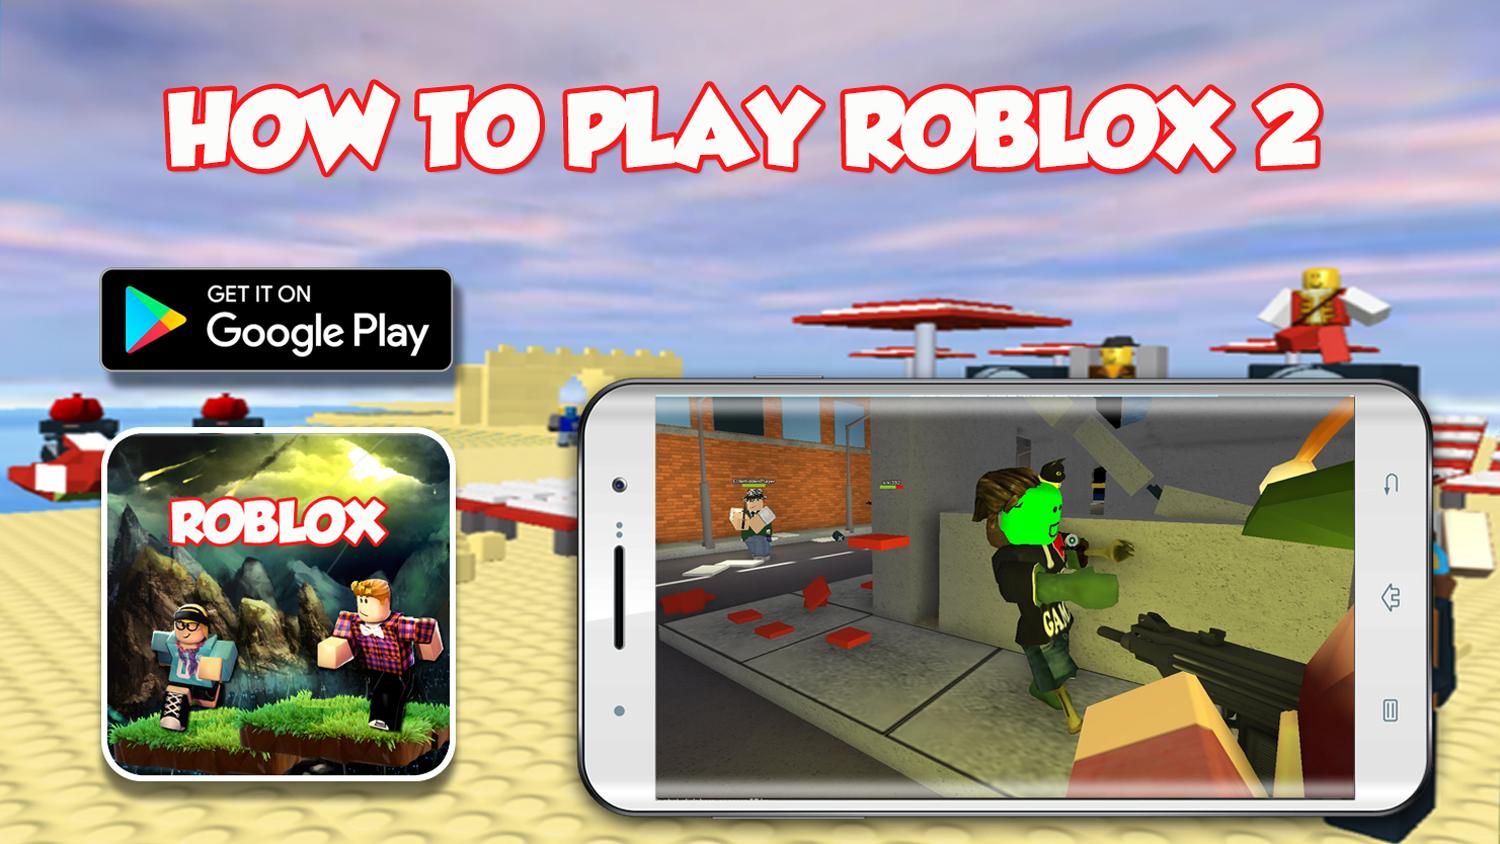 Guide For Roblox 2 Free For Android Apk Download - 